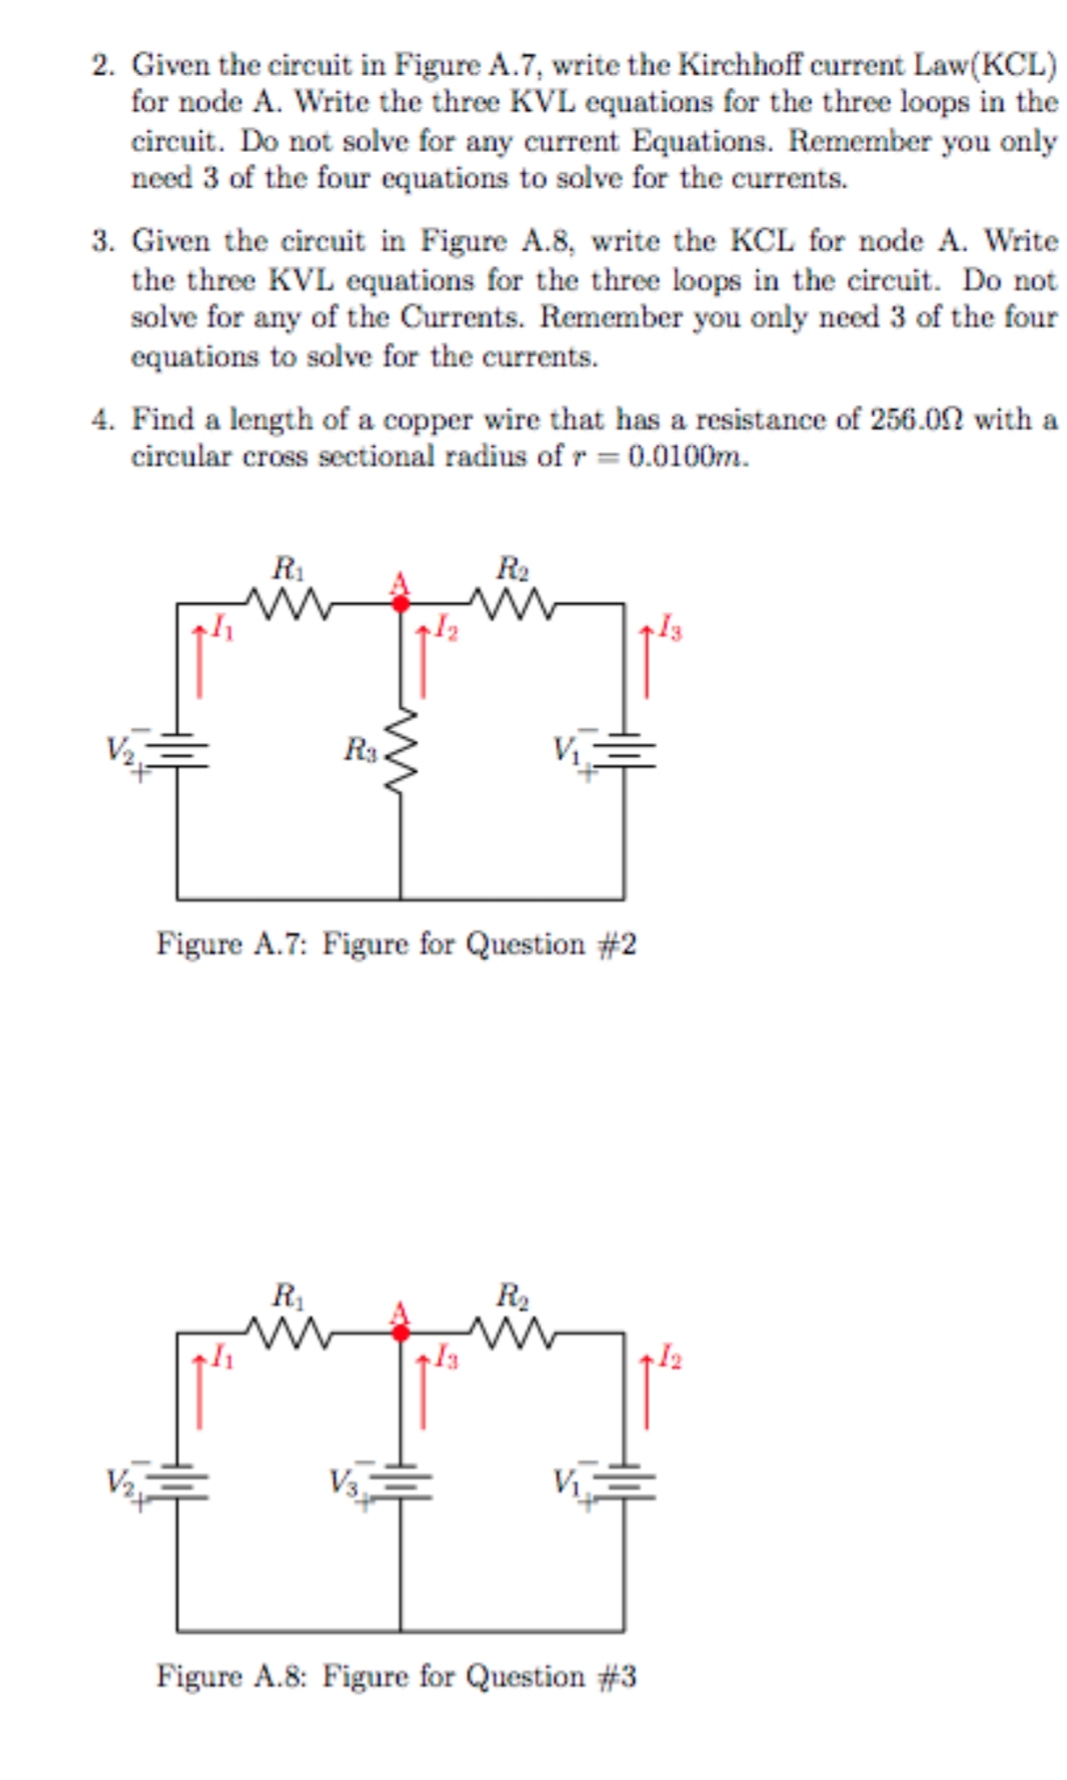 2. Given the circuit in Figure A.7, write the Kirchhoff current Law(KCL)
for node A. Write the three KVL equations for the three loops in the
circuit. Do not solve for any current Equations. Remember you only
need 3 of the four equations to solve for the currents.
3. Given the circuit in Figure A.8, write the KCL for node A. Write
the three KVL equations for the three loops in the circuit. Do not
solve for any of the Currents. Remember you only need 3 of the four
equations to solve for the currents.
4. Find a length of a copper wire that has a resistance of 256.0N with a
circular cross sectional radius of r = 0.0100m.
R1
R2
Rs
Figure A.7: Figure for Question #2
R1
R2
V3
Figure A.8: Figure for Question #3
